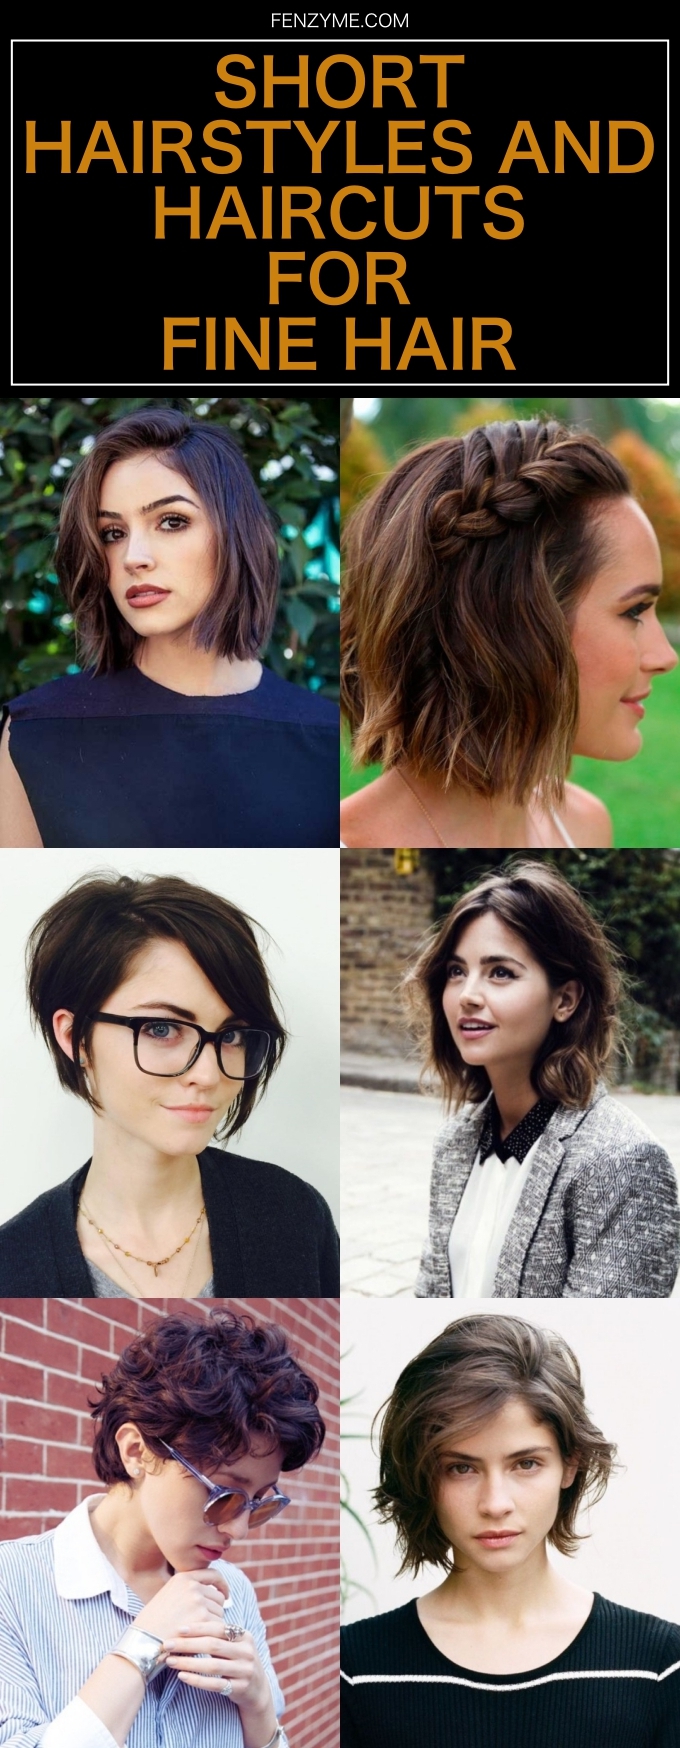 Short Hairstyles and Haircuts for Fine Hair